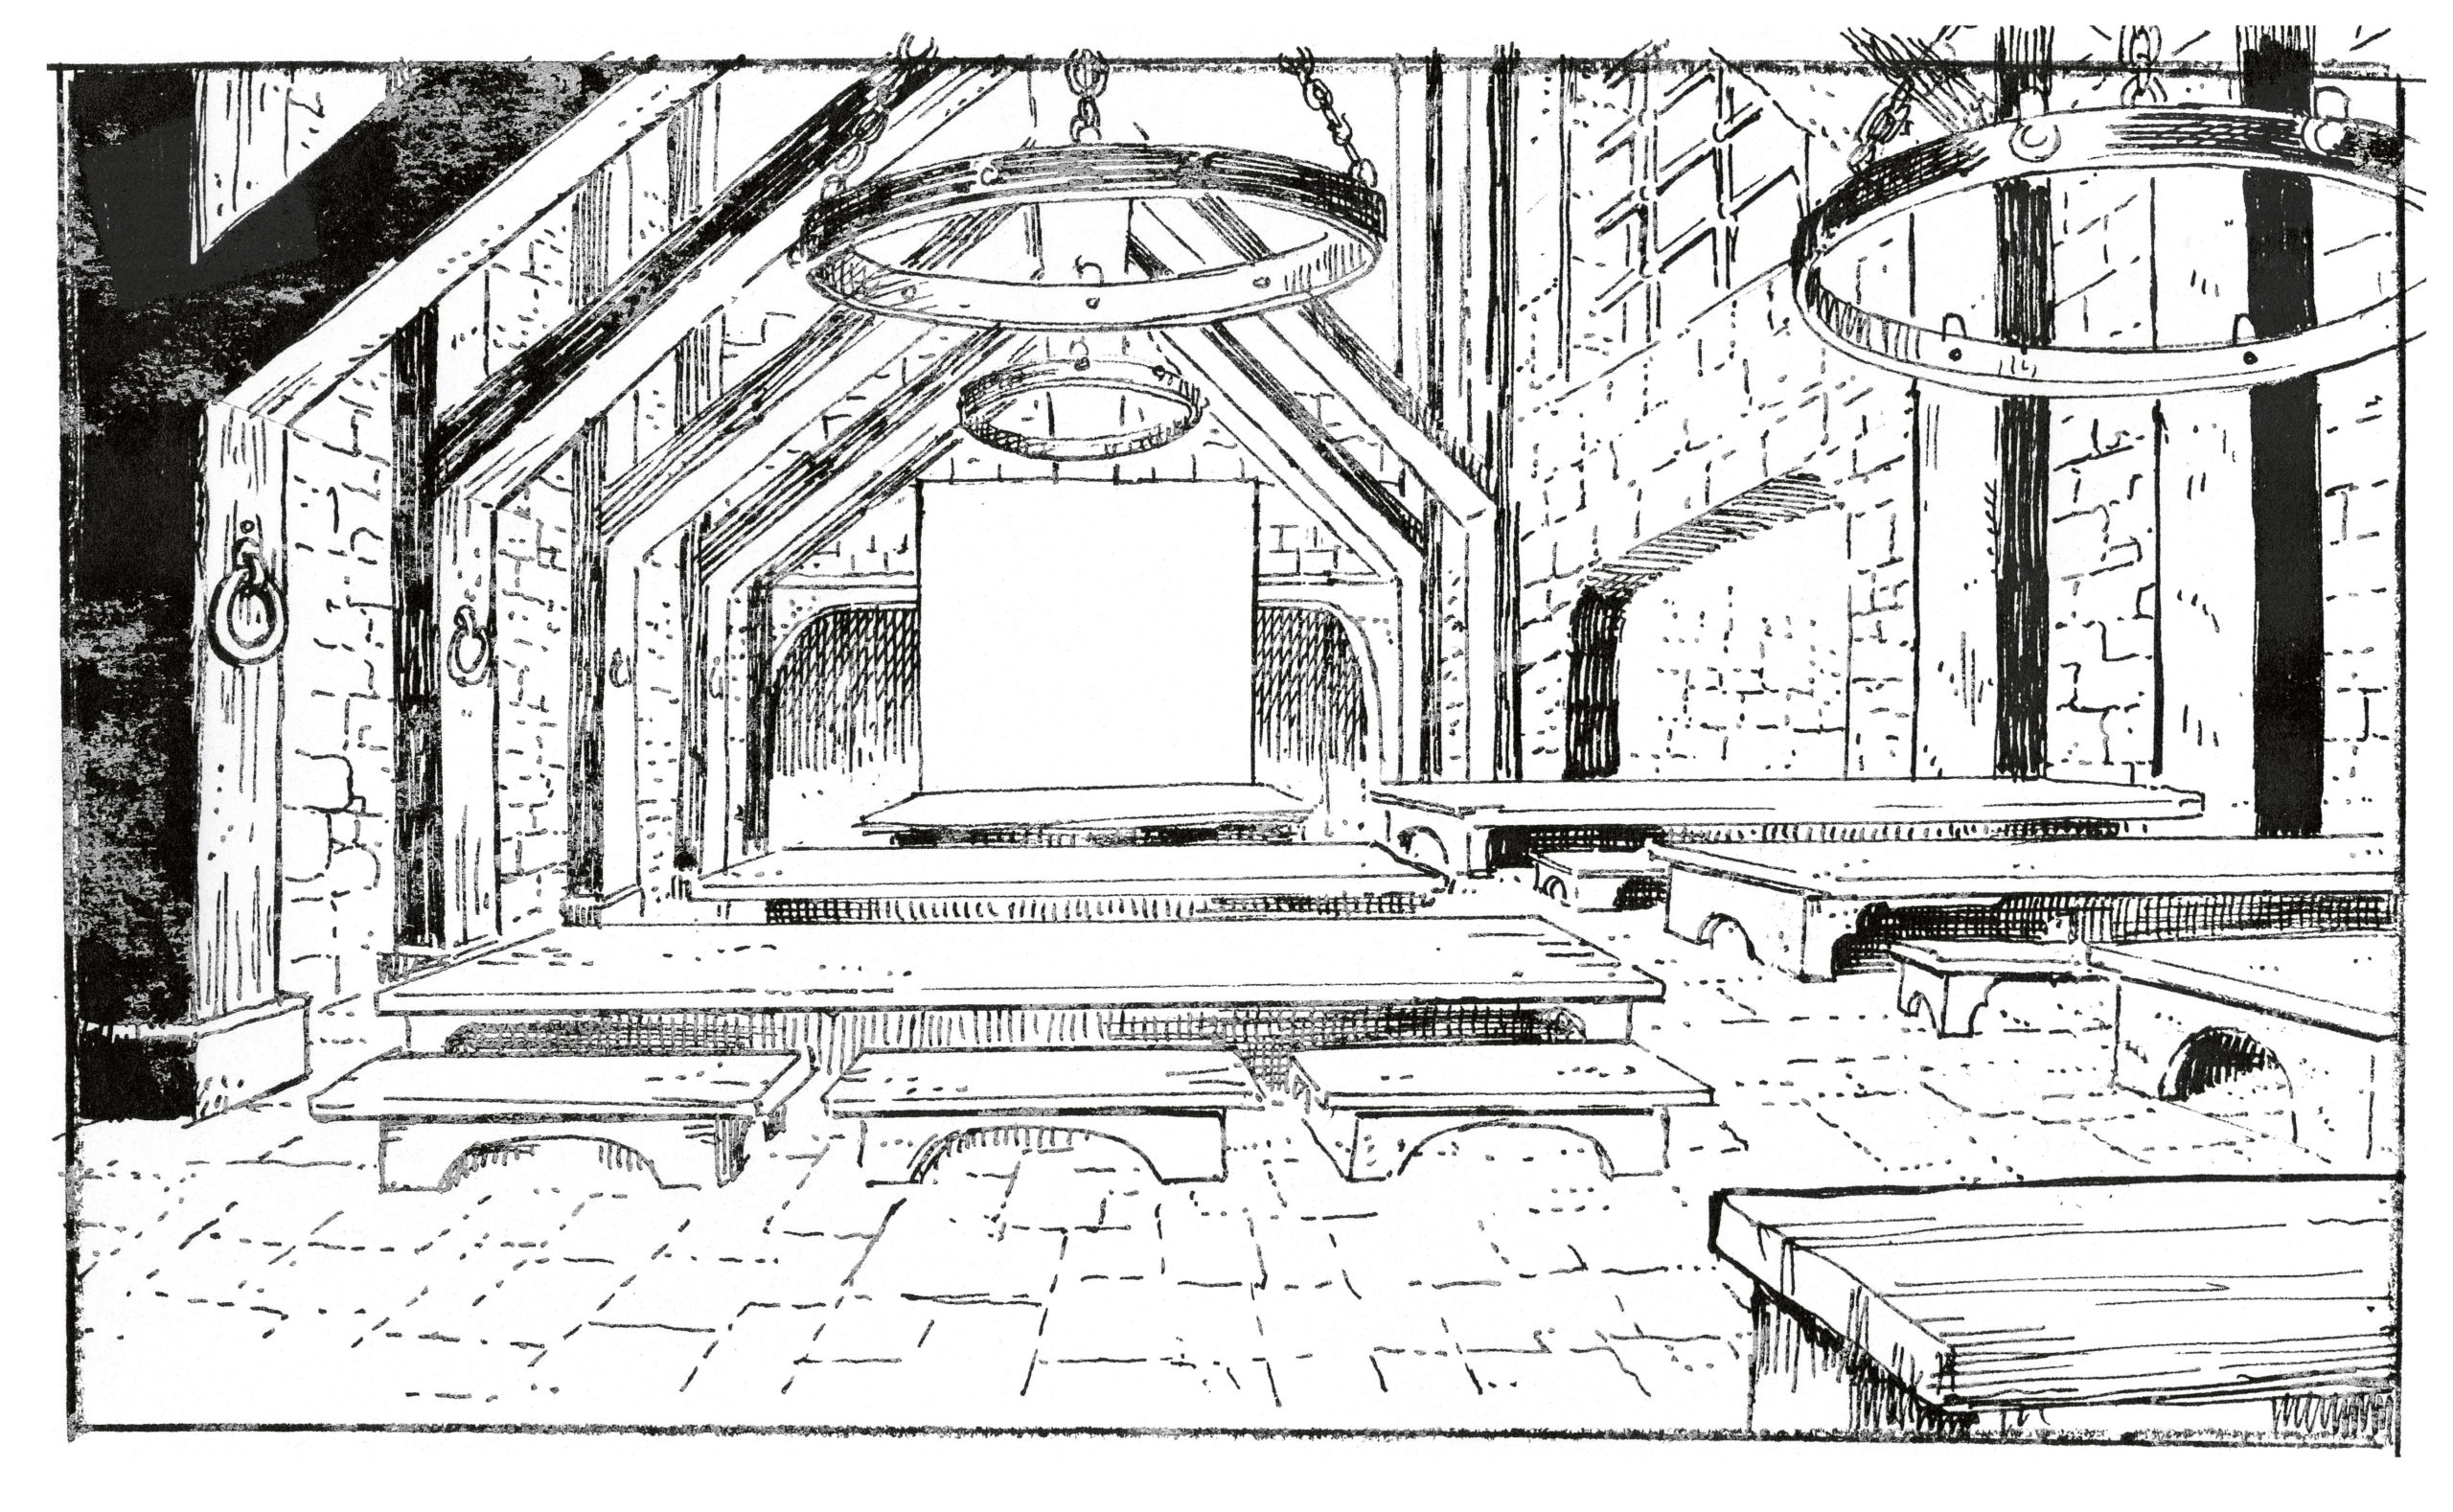 Interiors of a monastery dining hall featured in the series. (Illustration: Squillace, Pat Agnasin, Abrams)